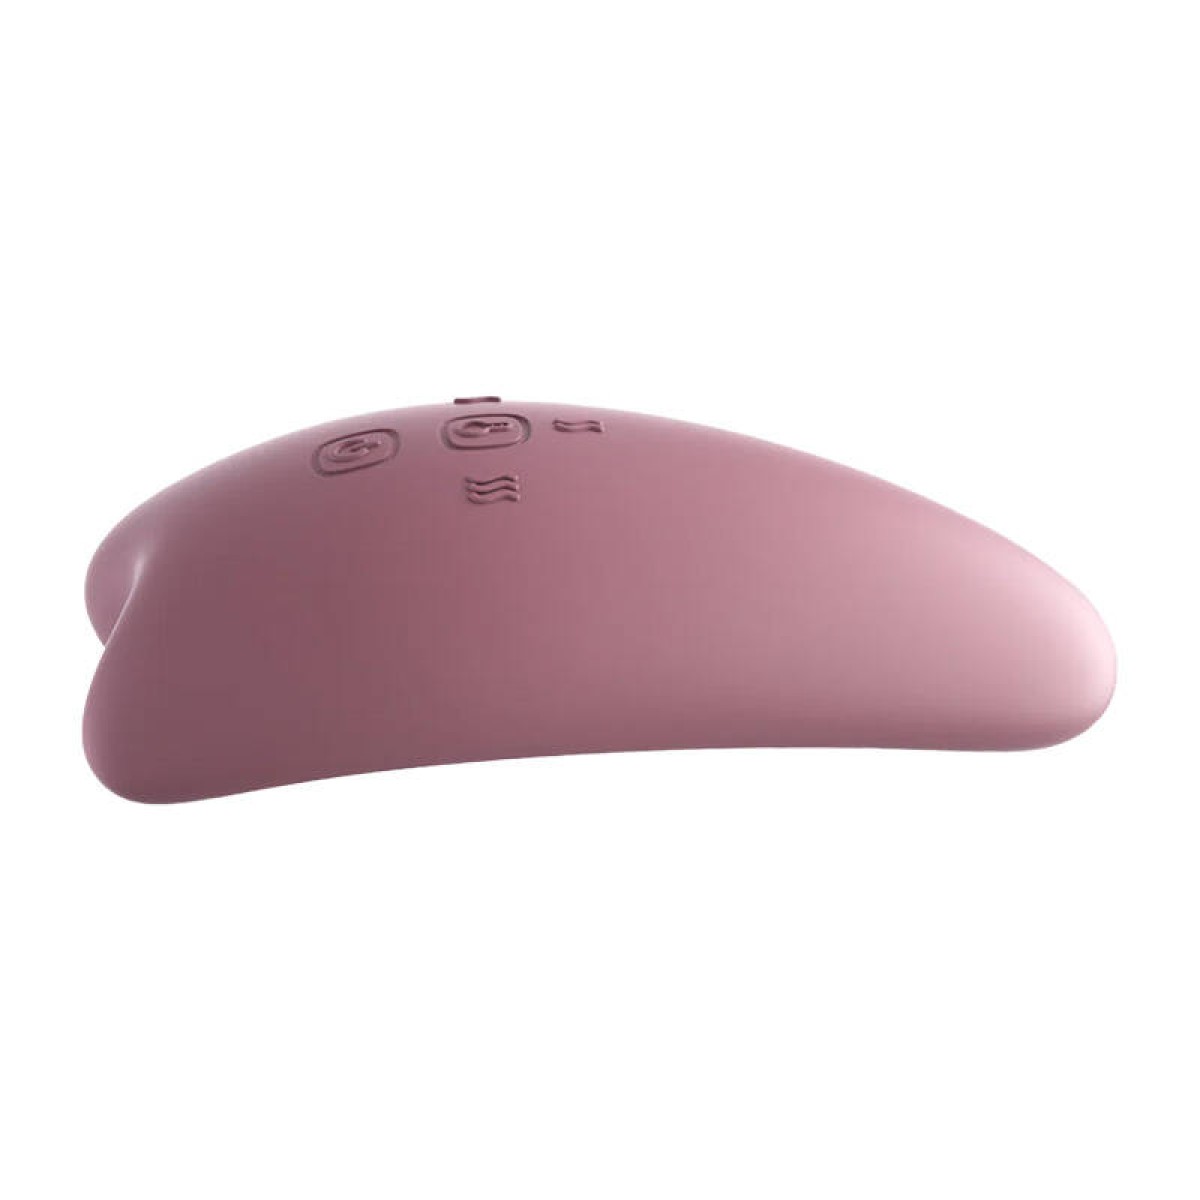 Lactation massager Momcozy LM01 (Pink) MCMLM01-GE00BA-LY